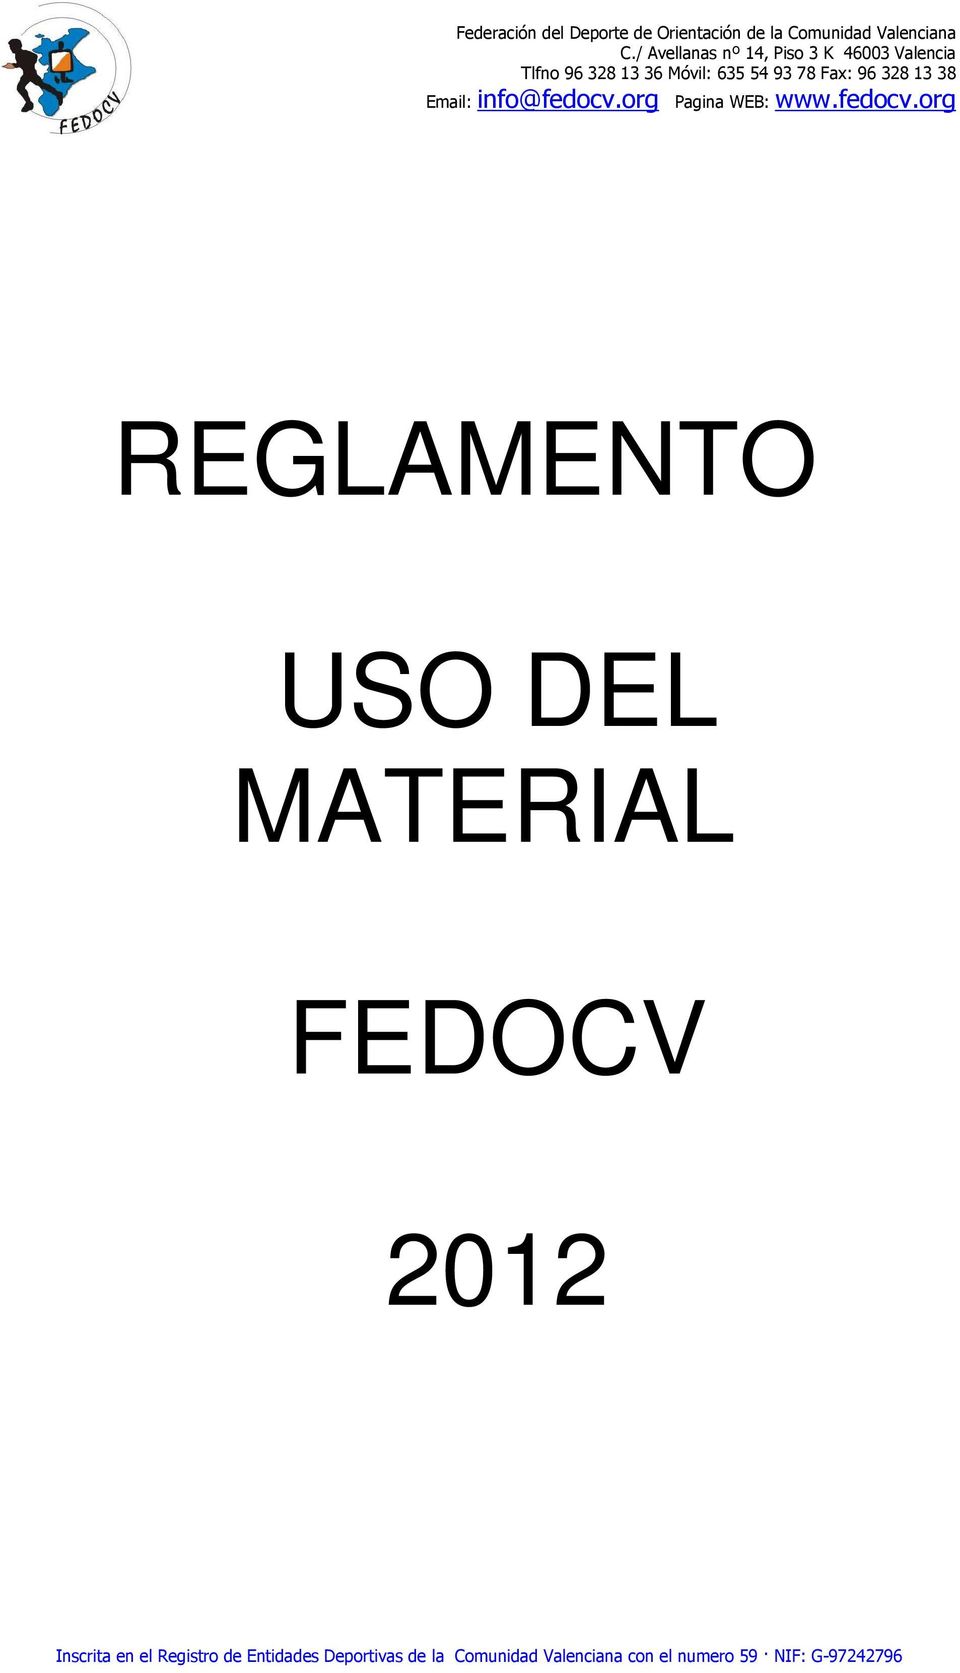 328 13 38 Email: info@fedocv.